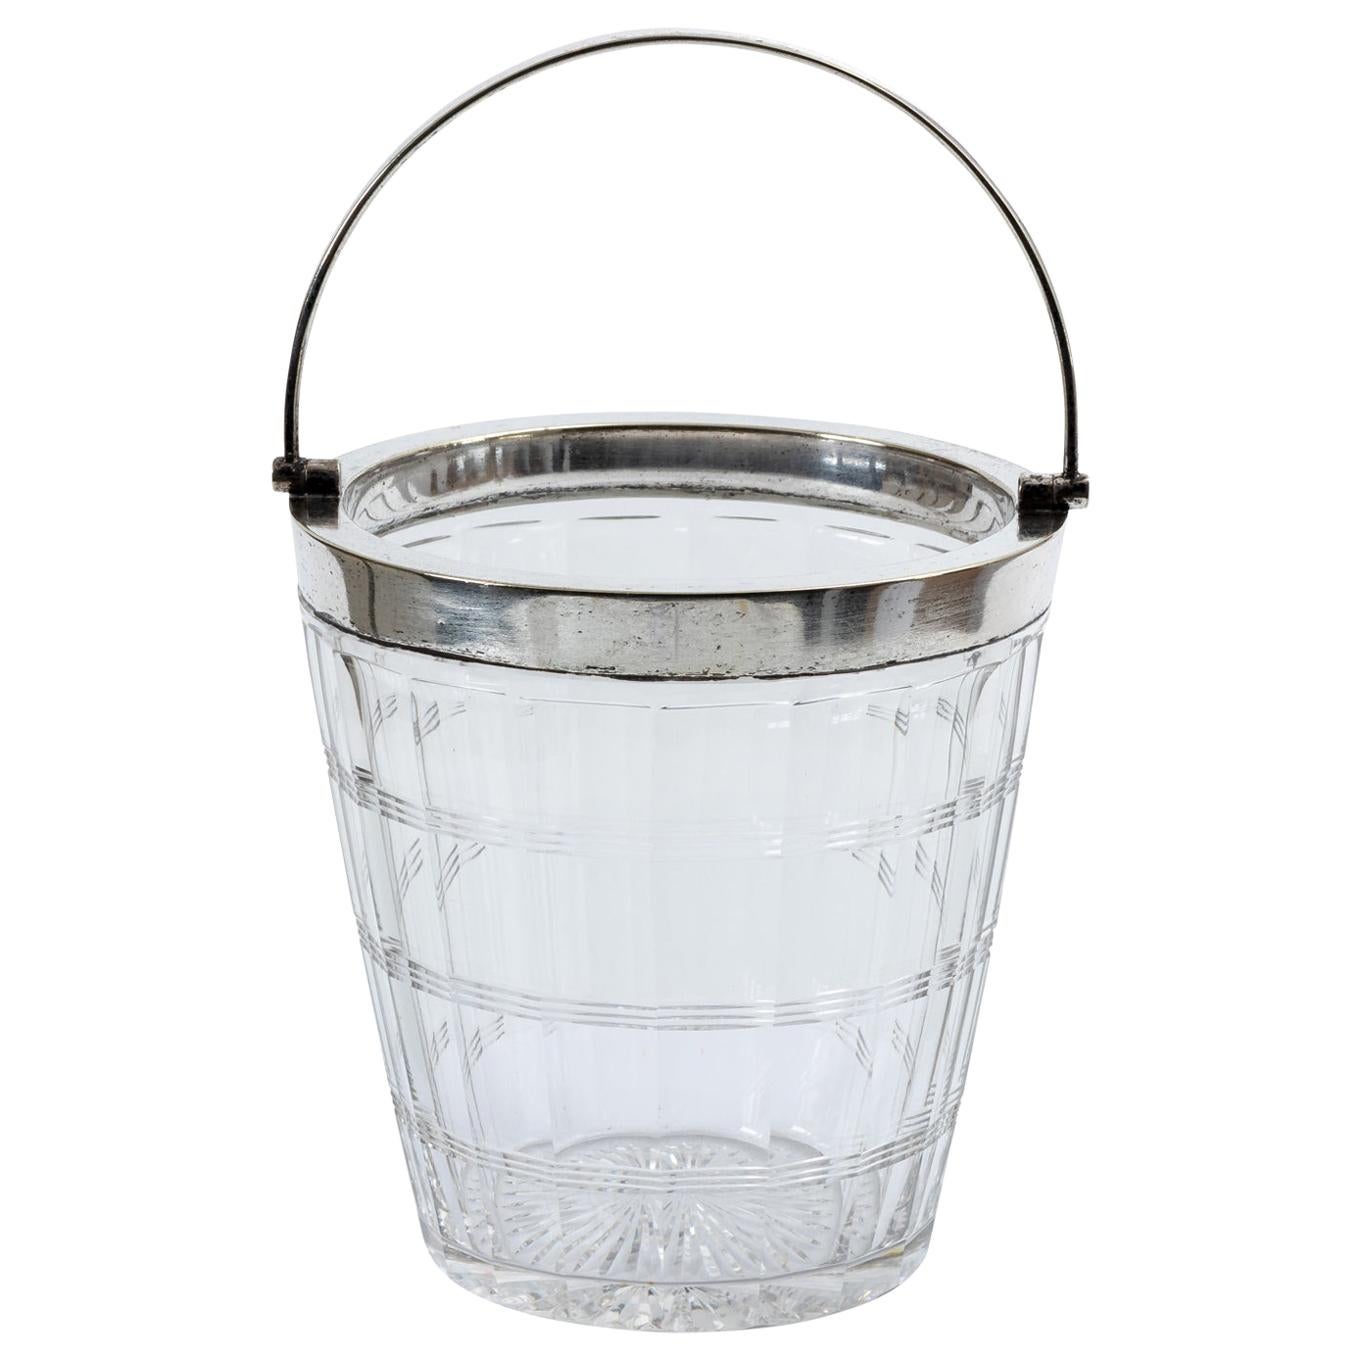 English Silver Plated Ice Pail For Sale